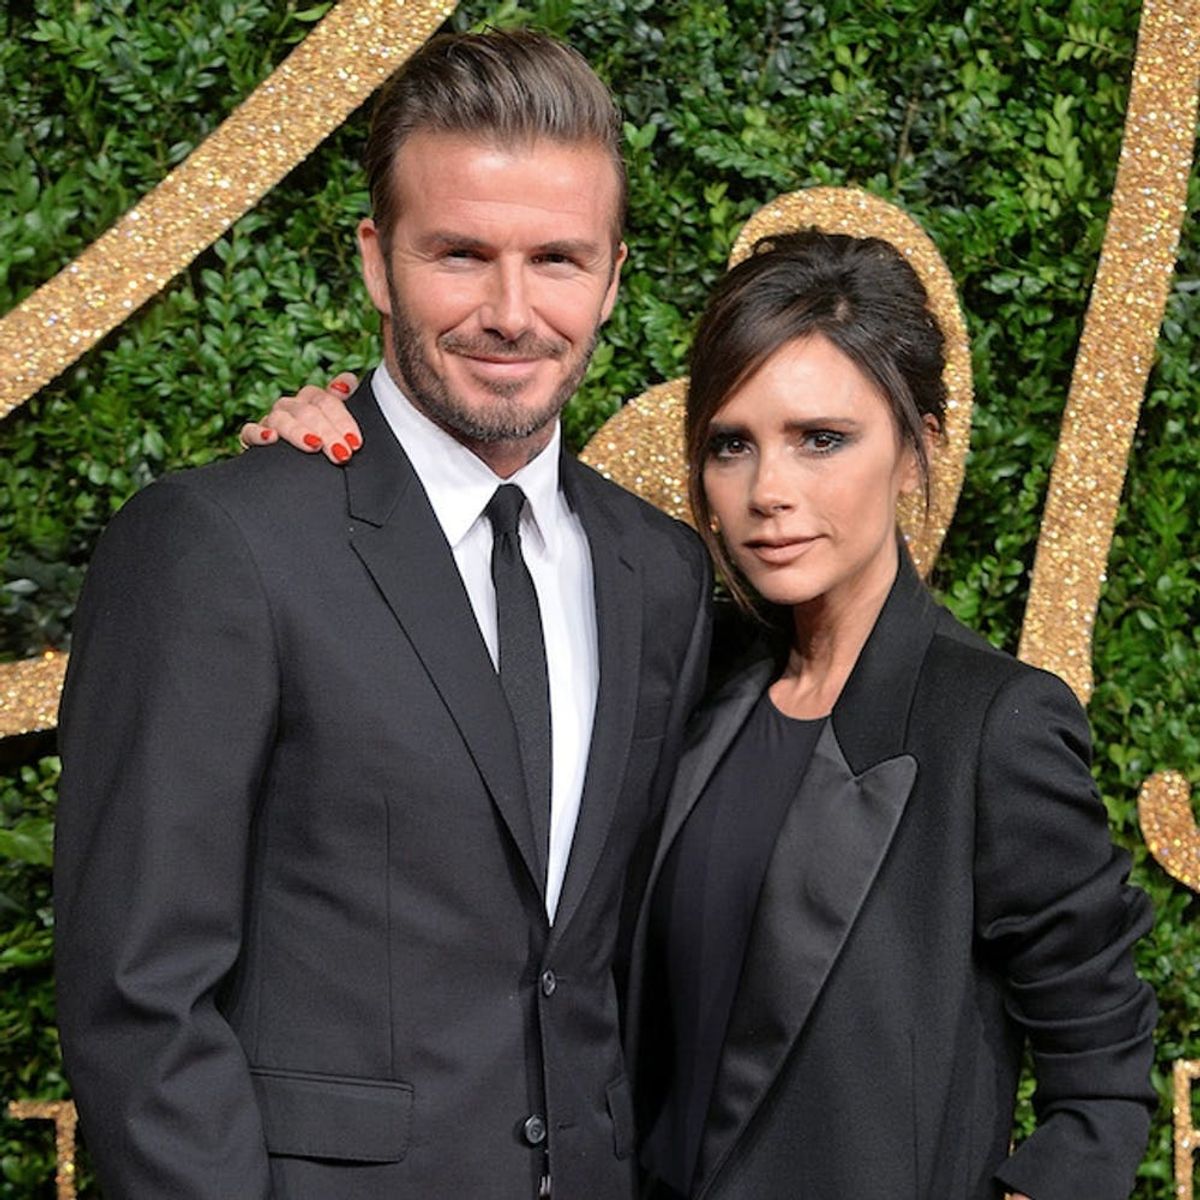 David Beckham Says THIS Is the Secret to His and Victoria’s Happy Marriage